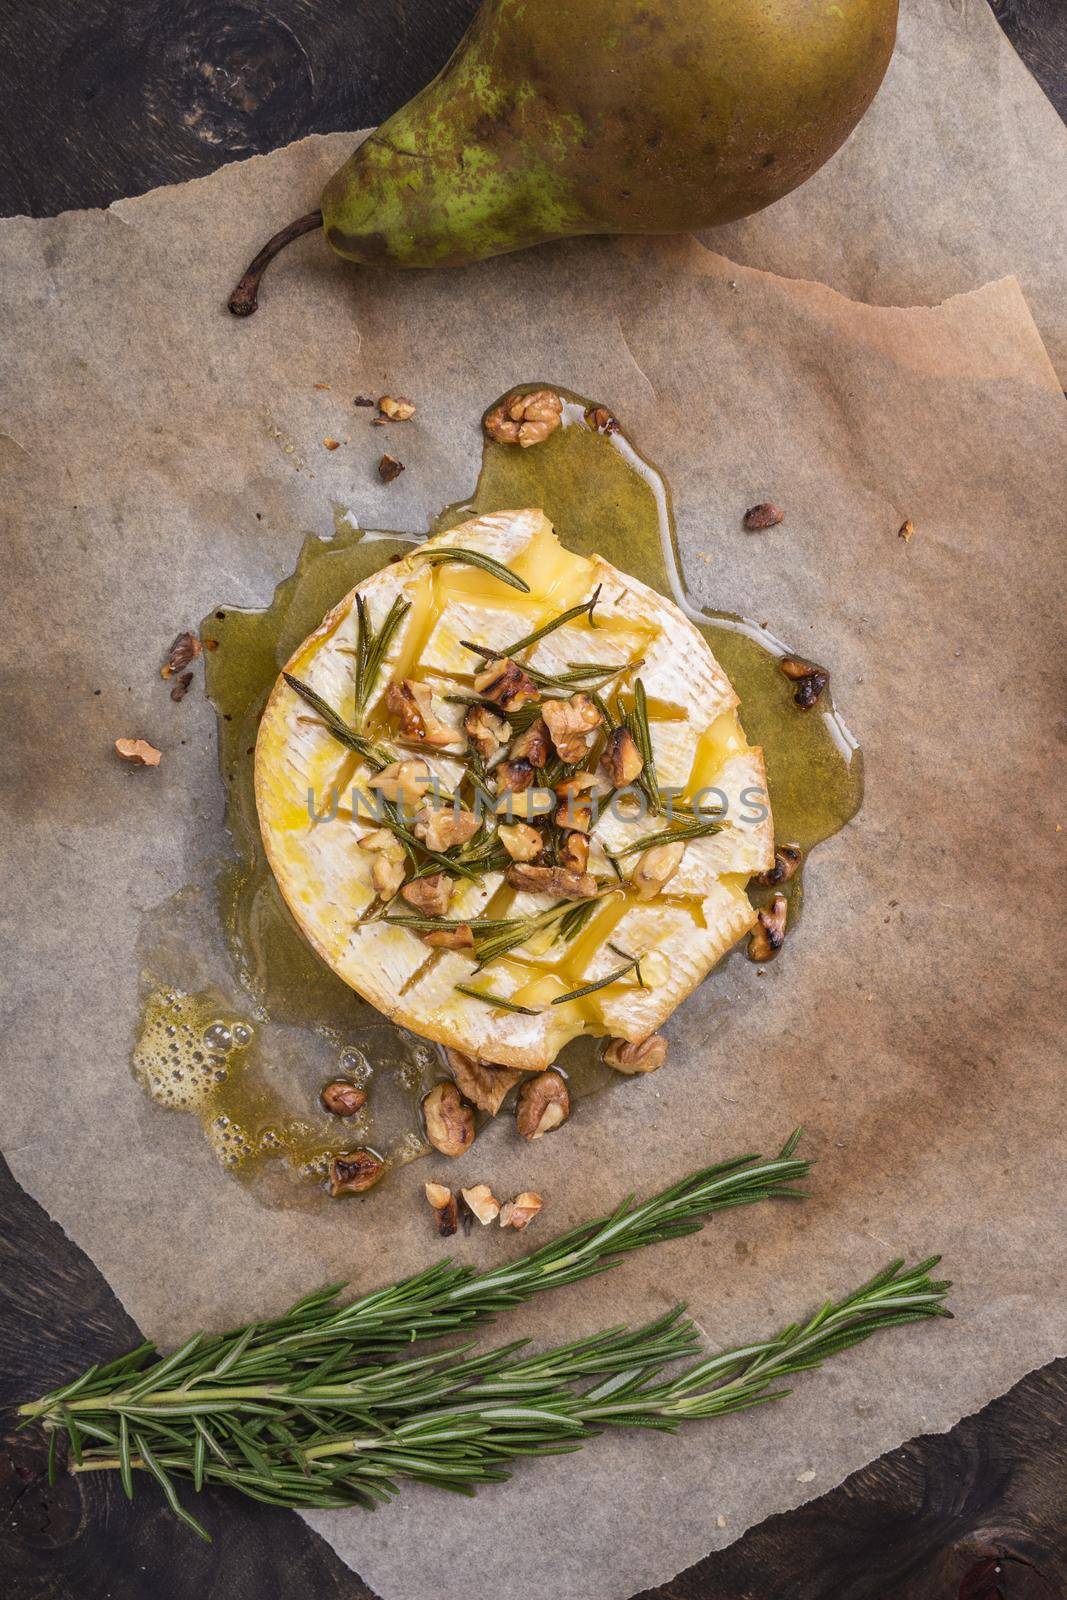 Delicious baked camembert with honey, walnuts, herbs and pears by its_al_dente